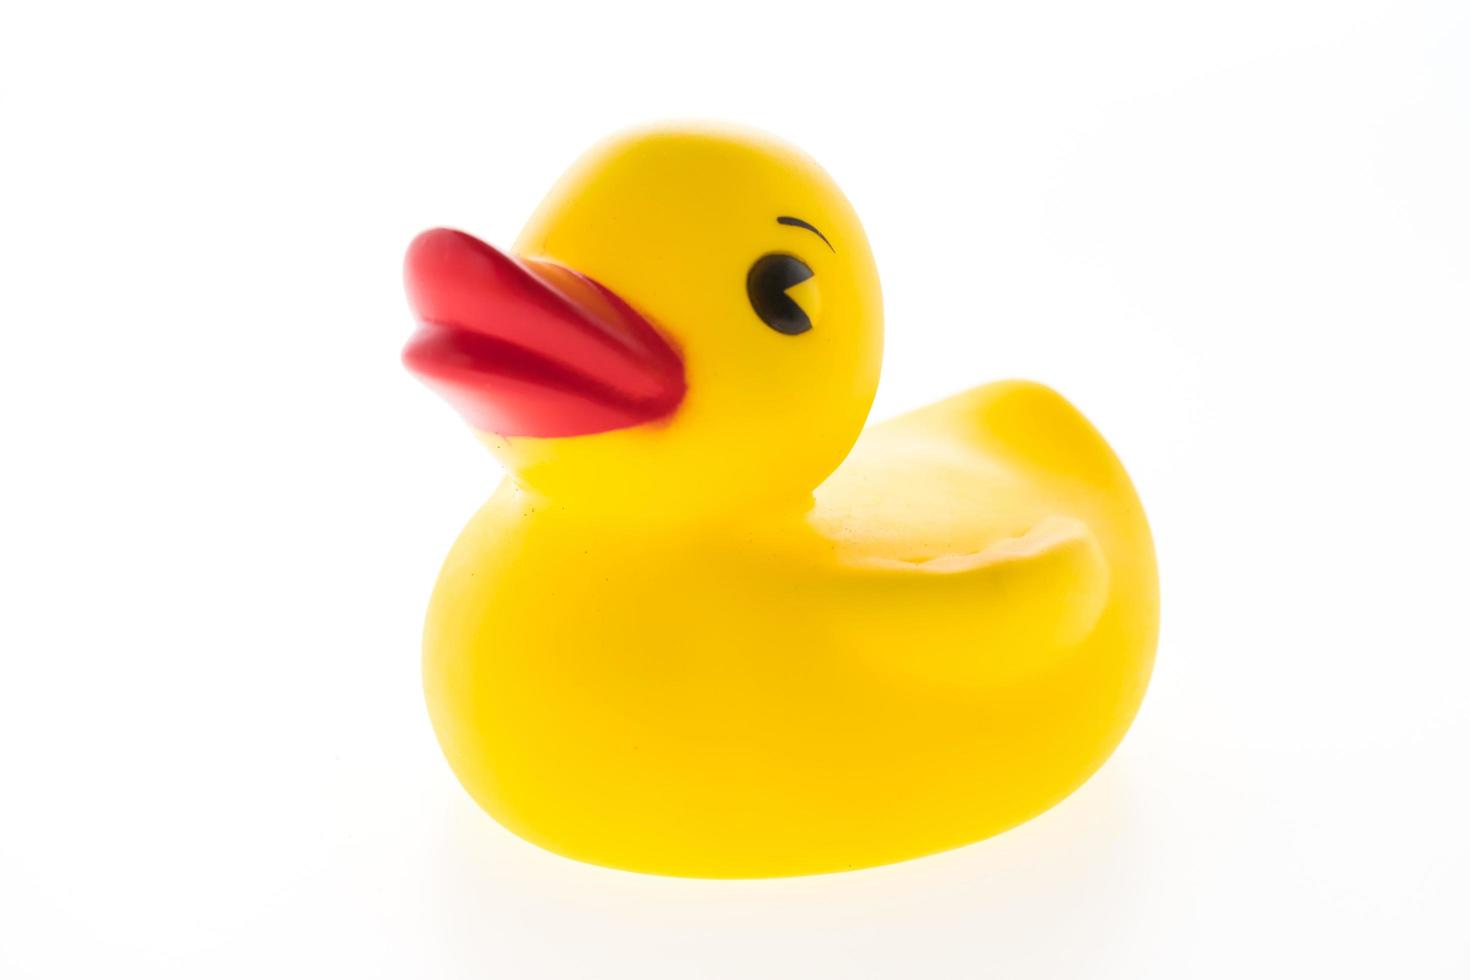 Yellow rubber duck on white background photo